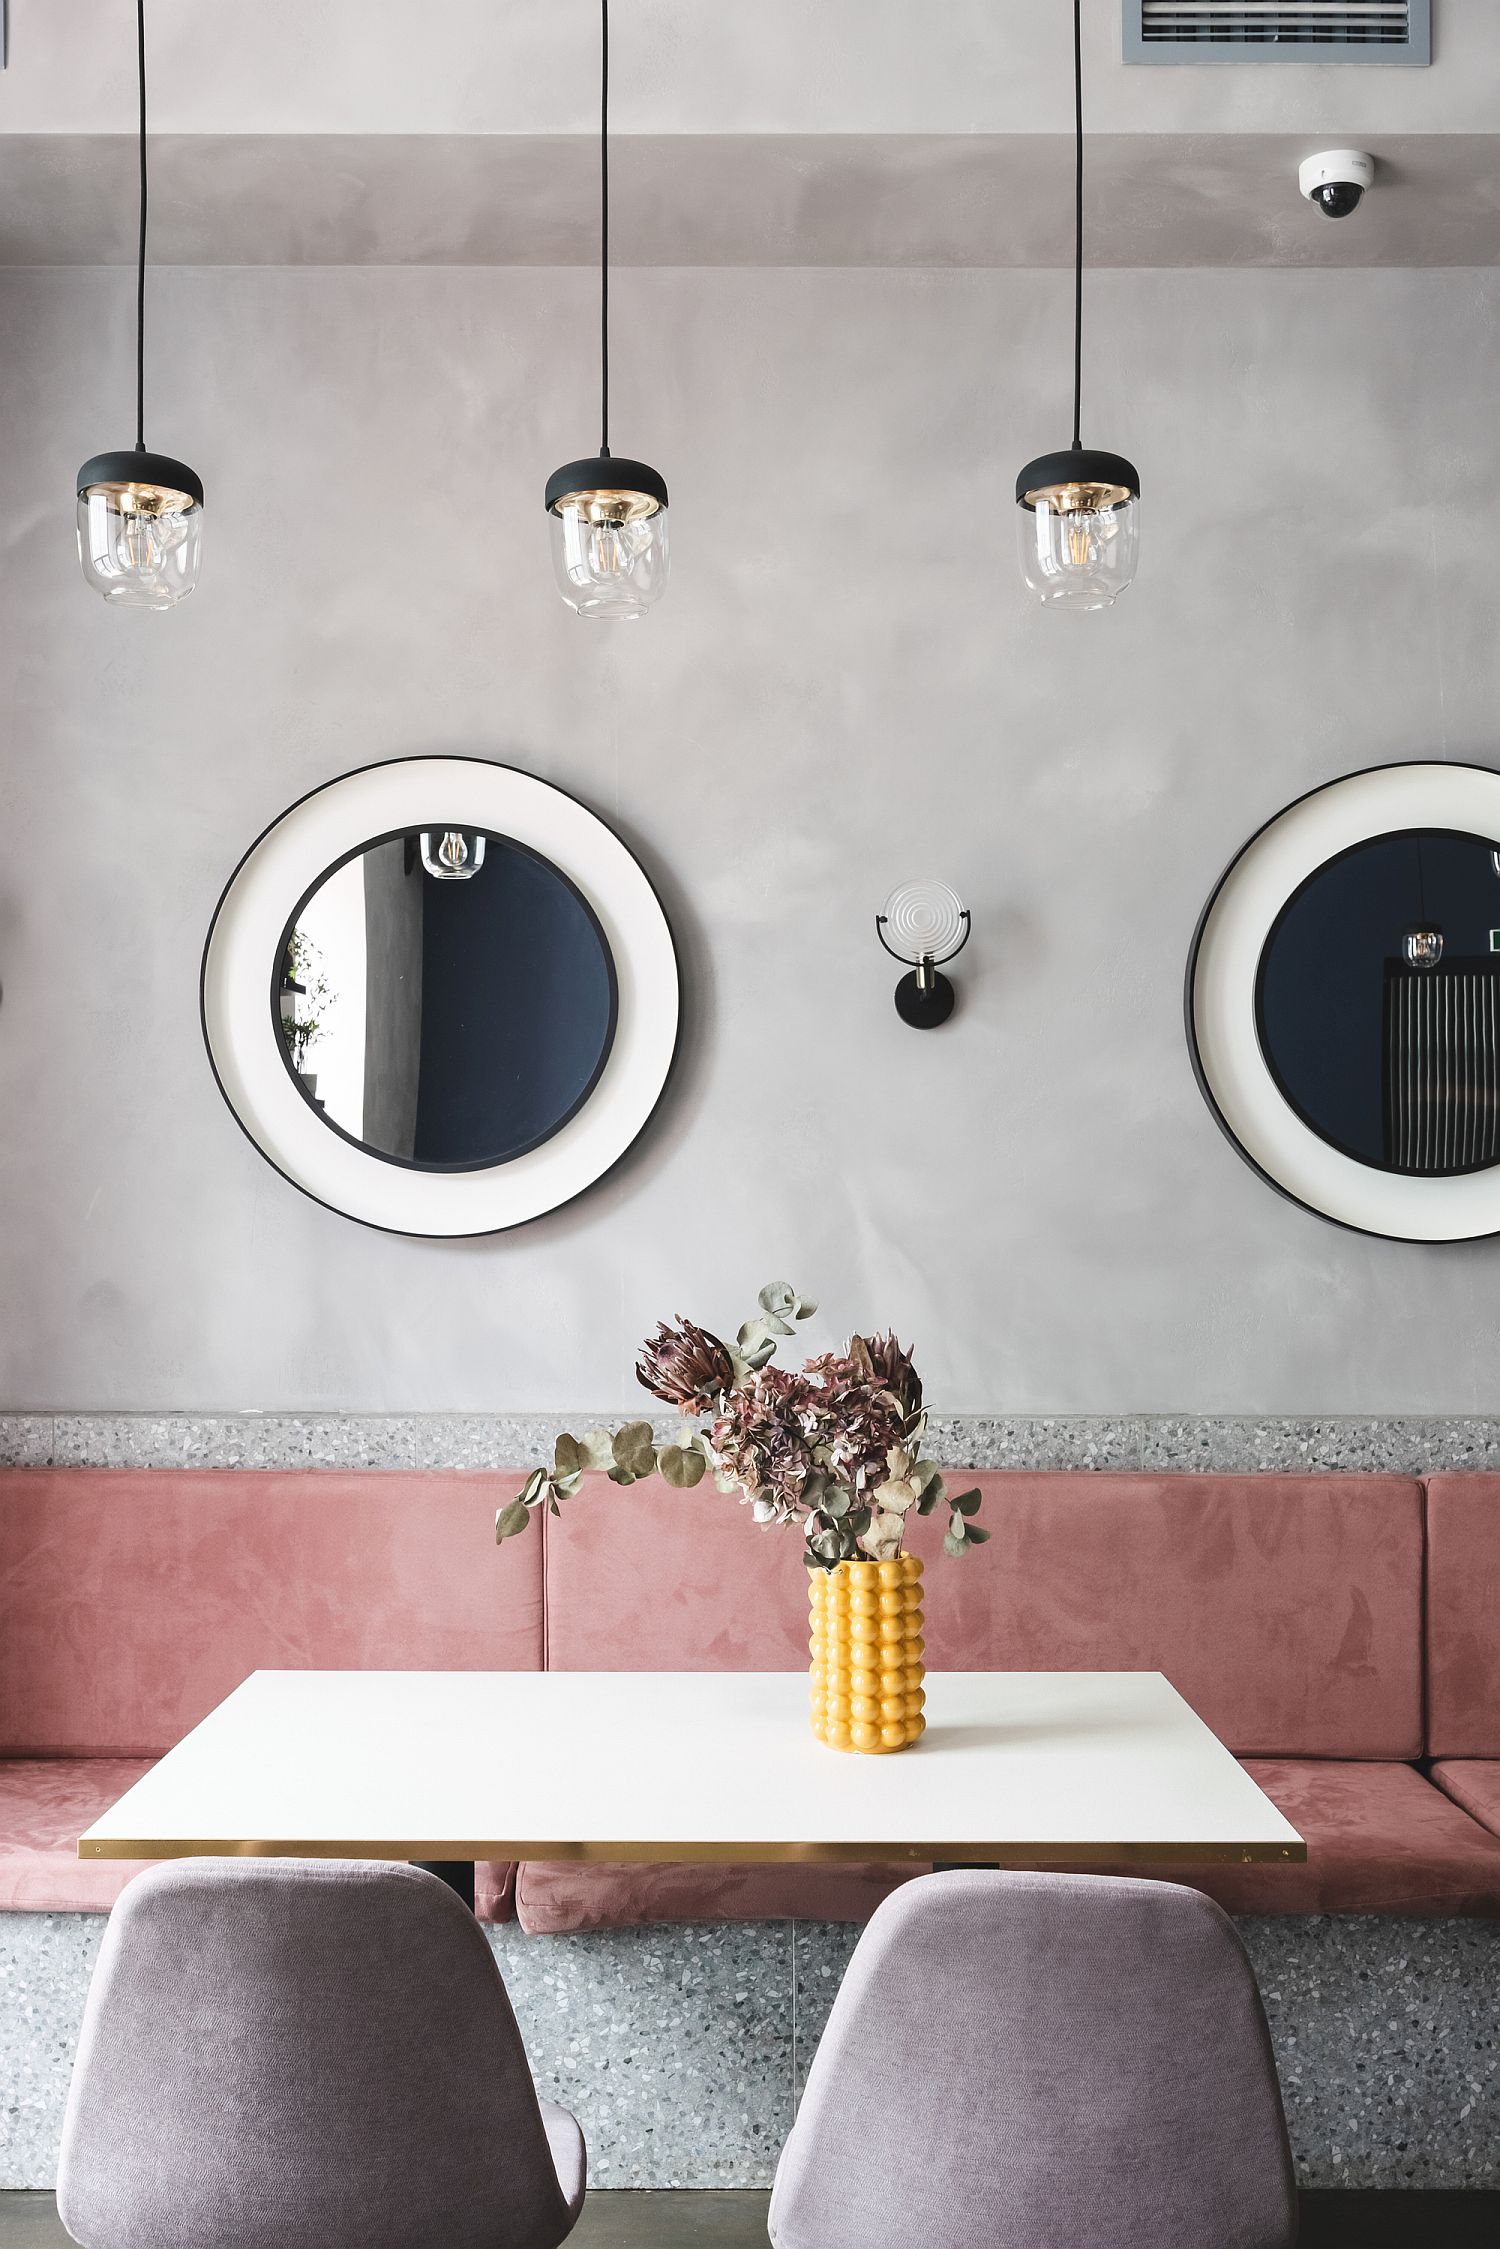 Circular-windows-along-with-smart-lighting-inside-the-Russian-cafe